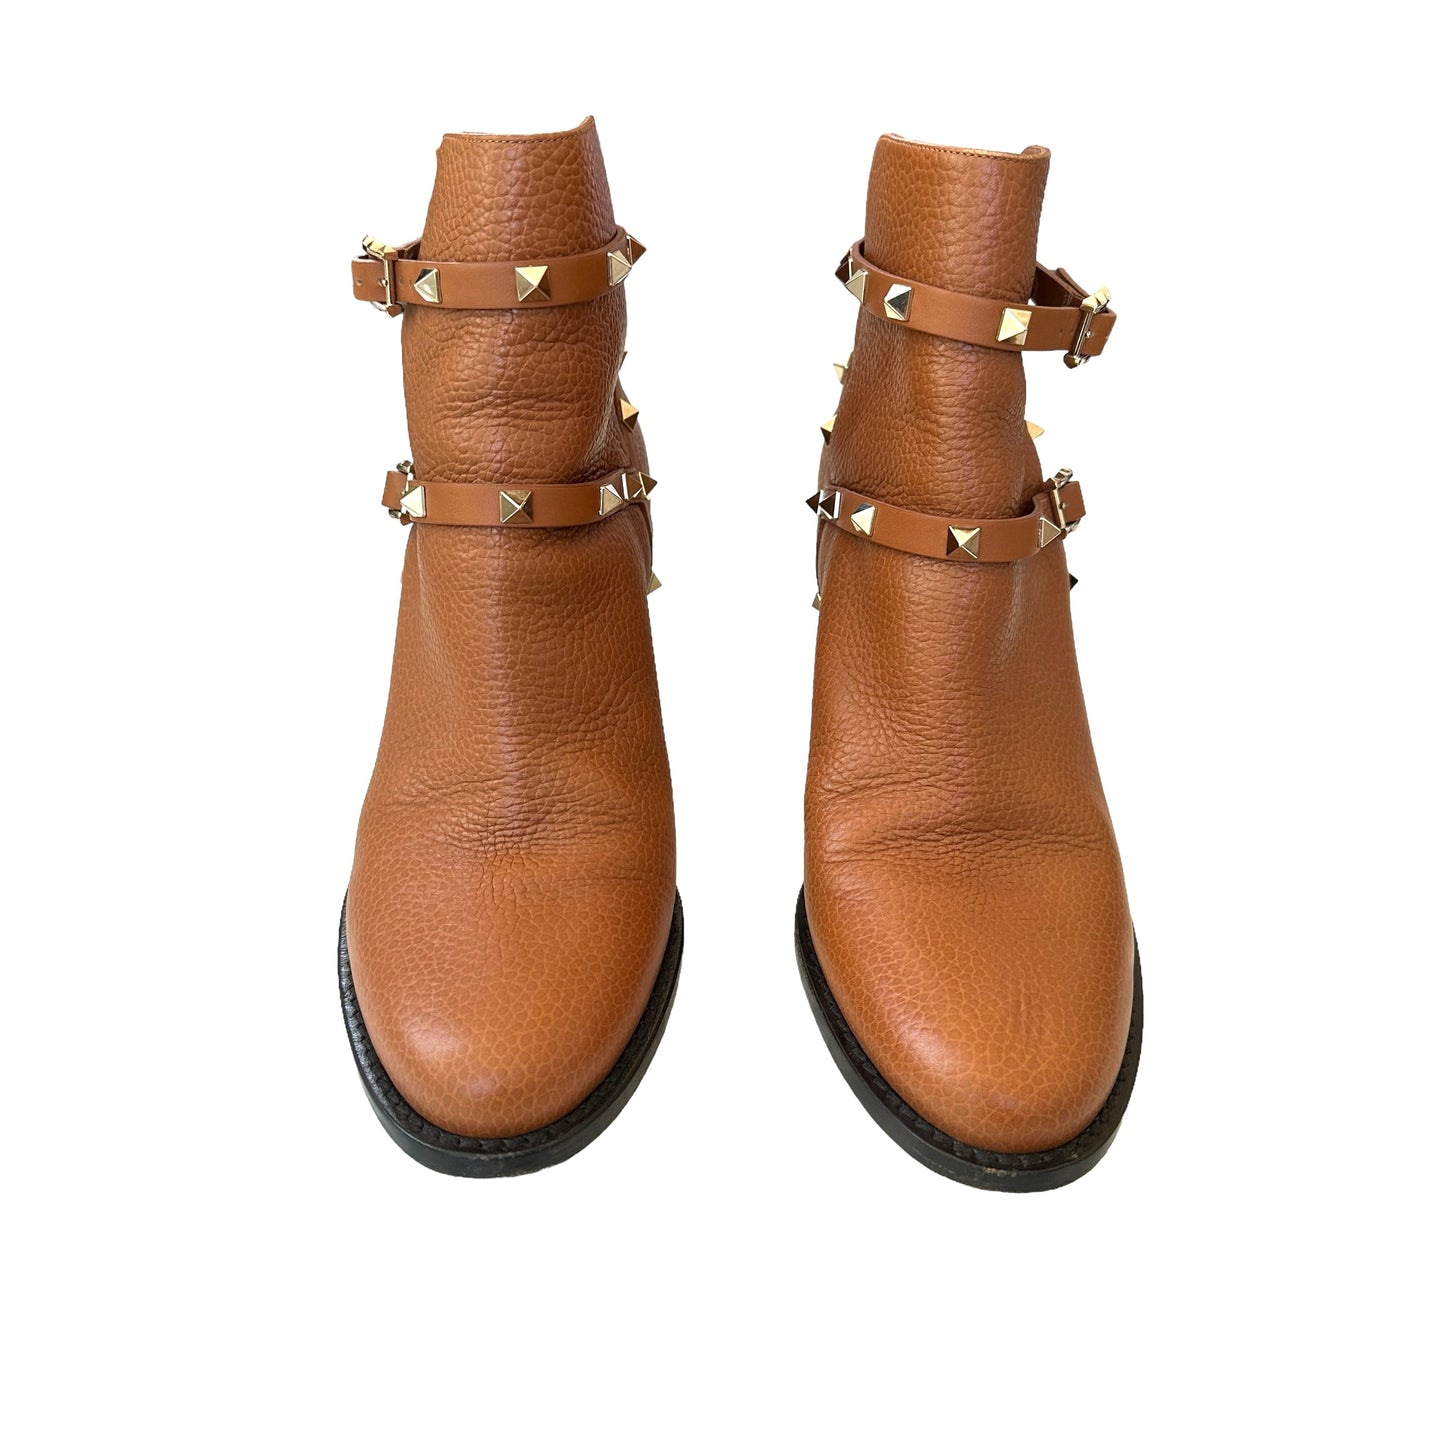 Brown Leather Rockstud Boots - 10